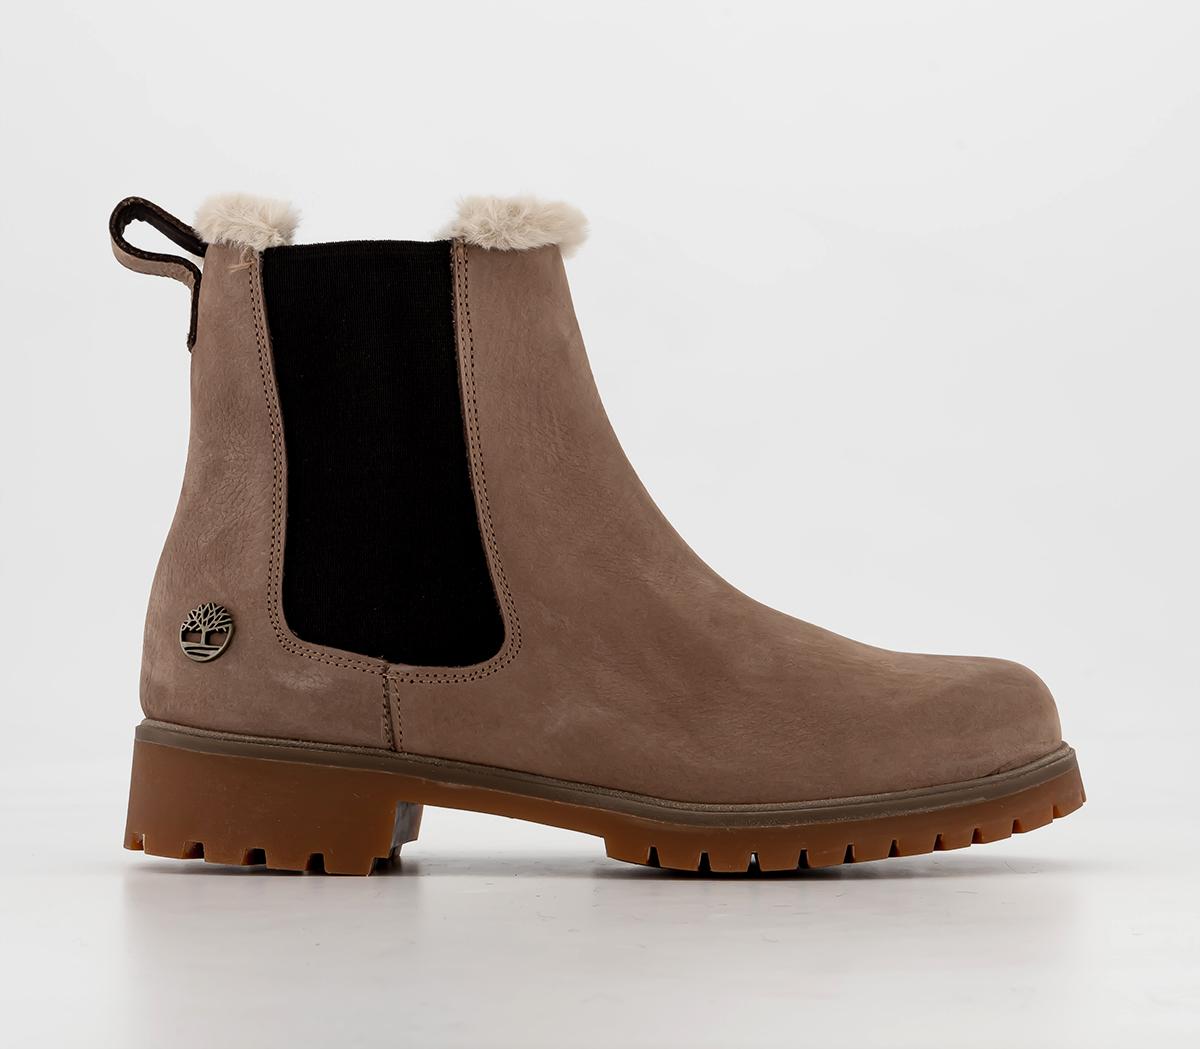 Timberland Lyonsdale Chelsea Boots Tan Fur Lined - Women's Chelsea Boots